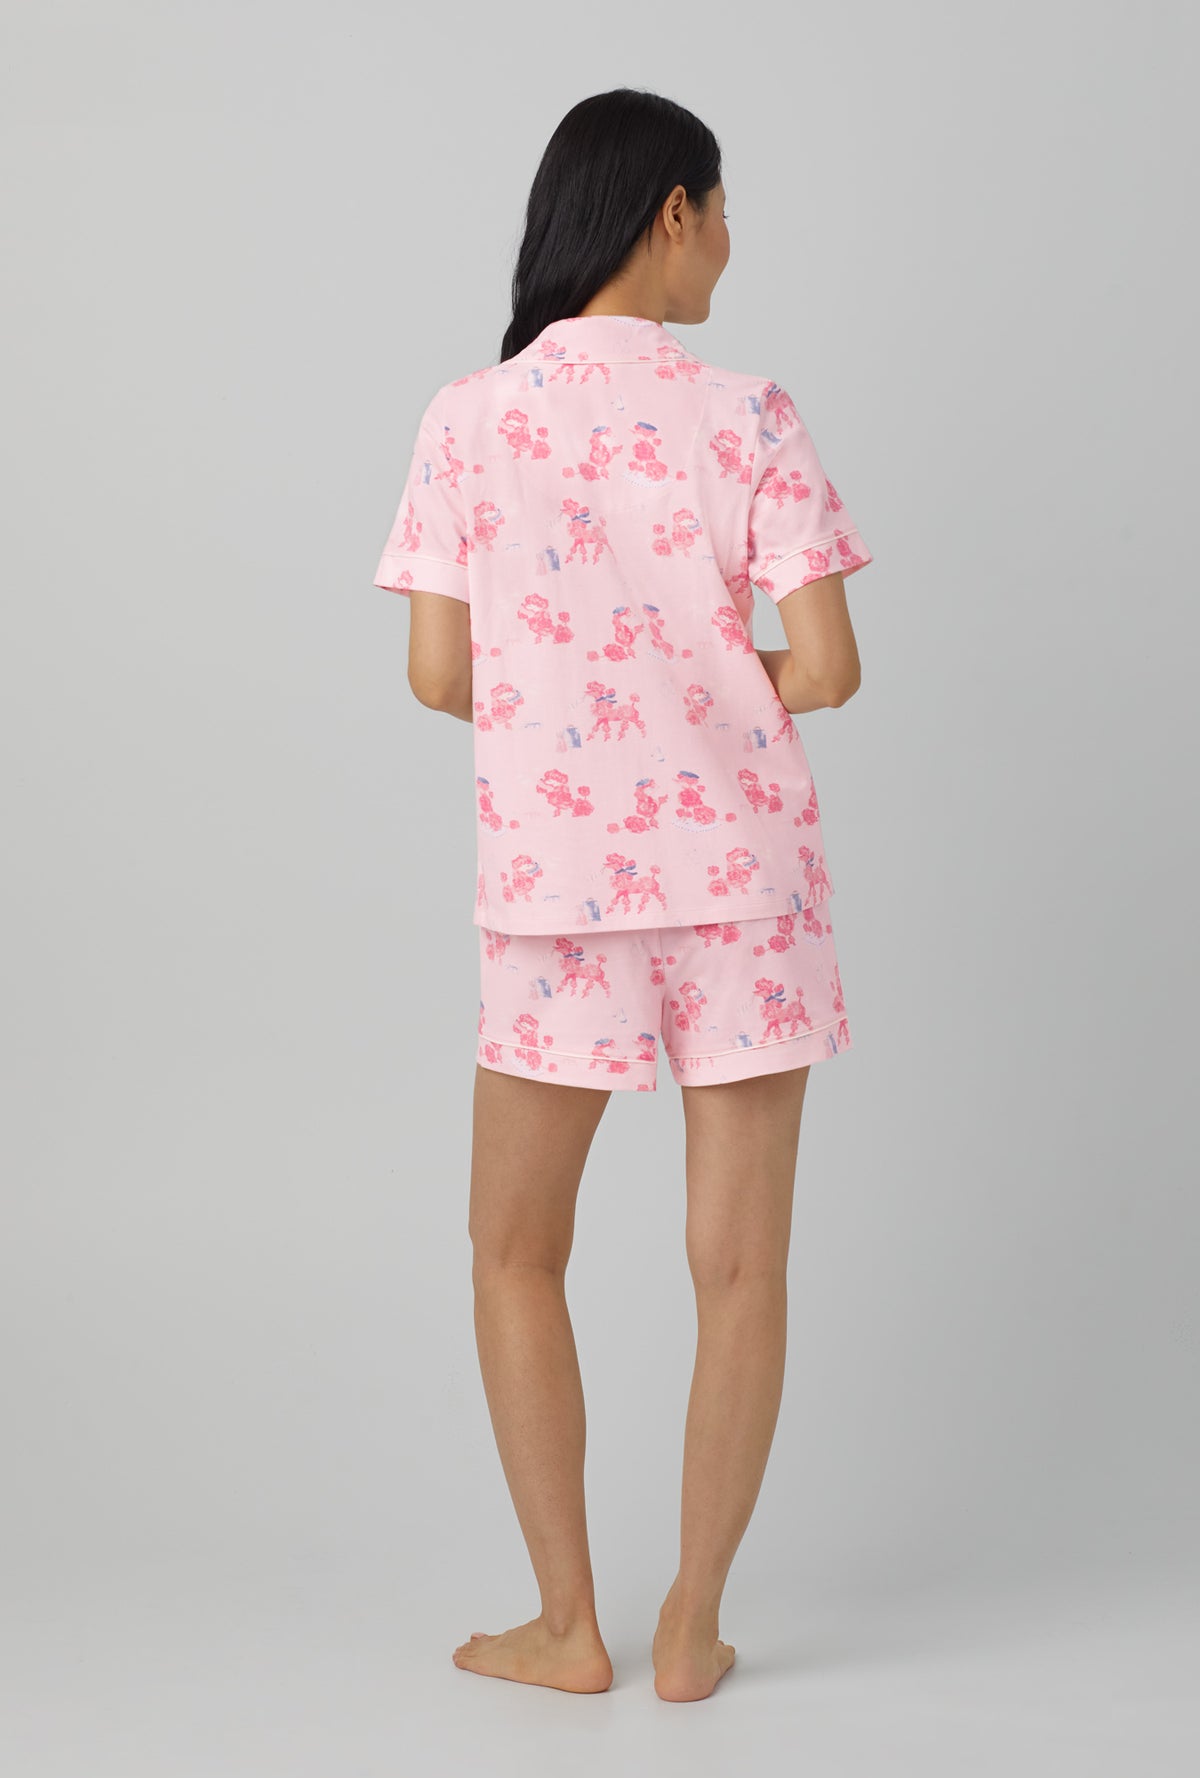 A lady wearing Pink Short Sleeve Classic Short Set Stretch Jersey PJ Set with pampered Poodles print